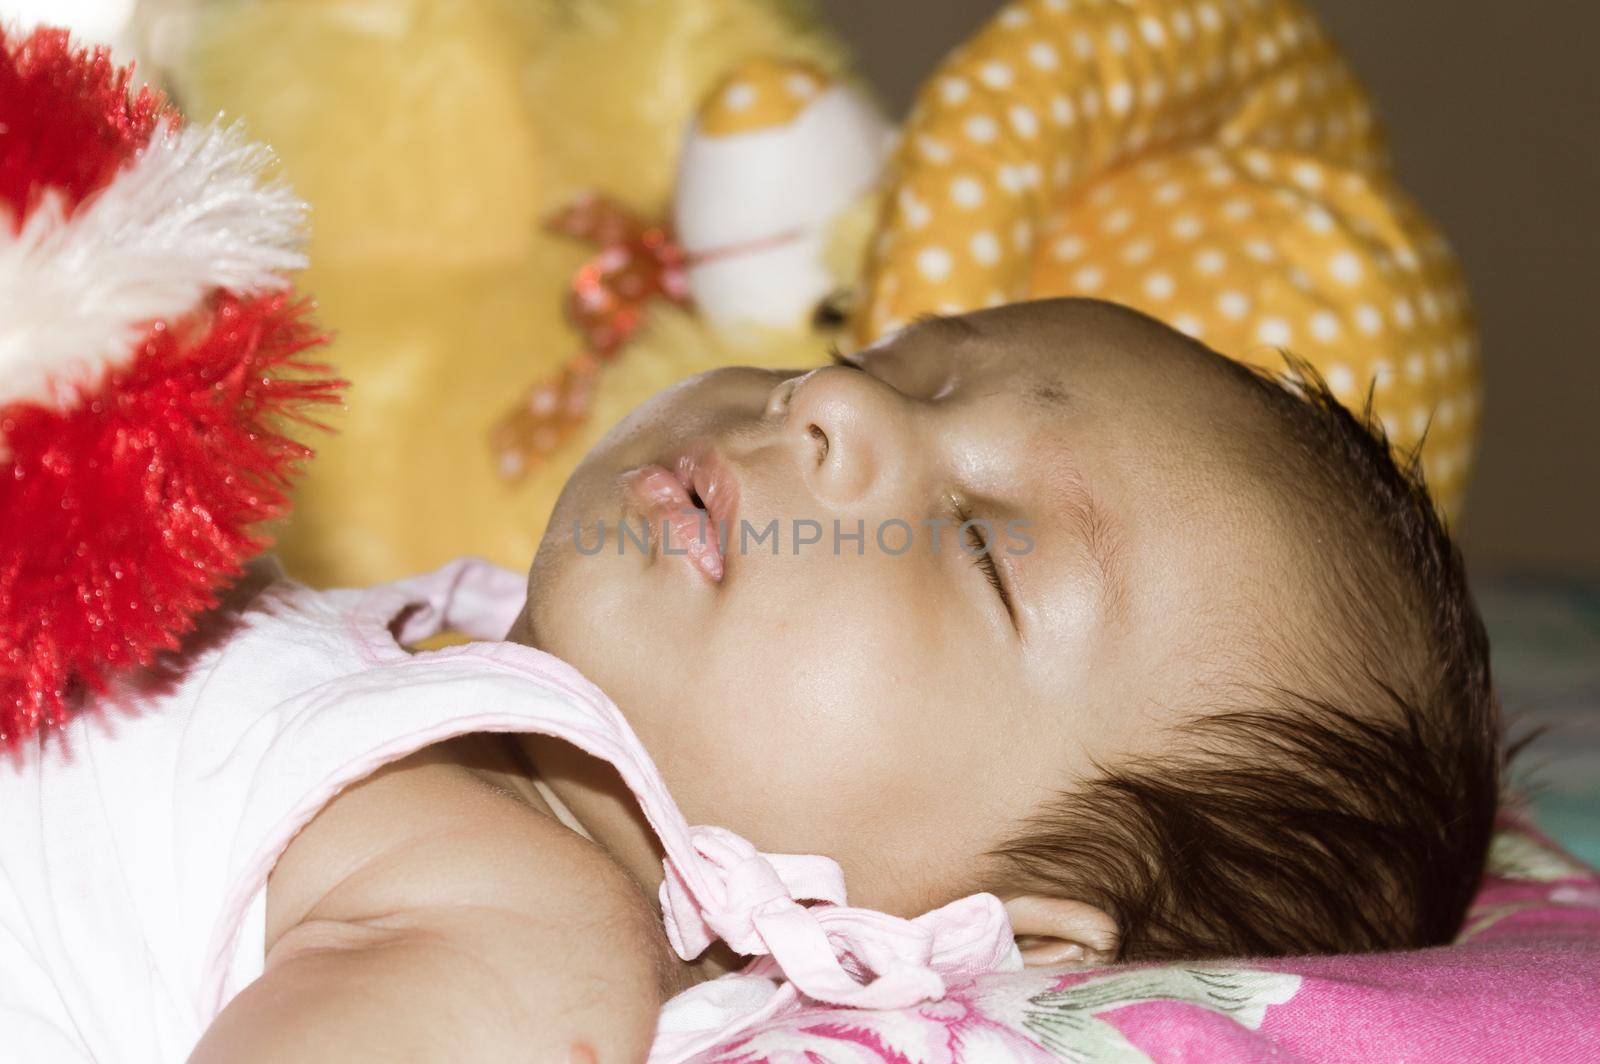 Close up face of cute sleeping newborn baby boy in drowsy eyes sleepy mood lying on bed. Portrait One Sweet little infant toddler. Indian ethnicity. Front view. Child care peace tranquil background.